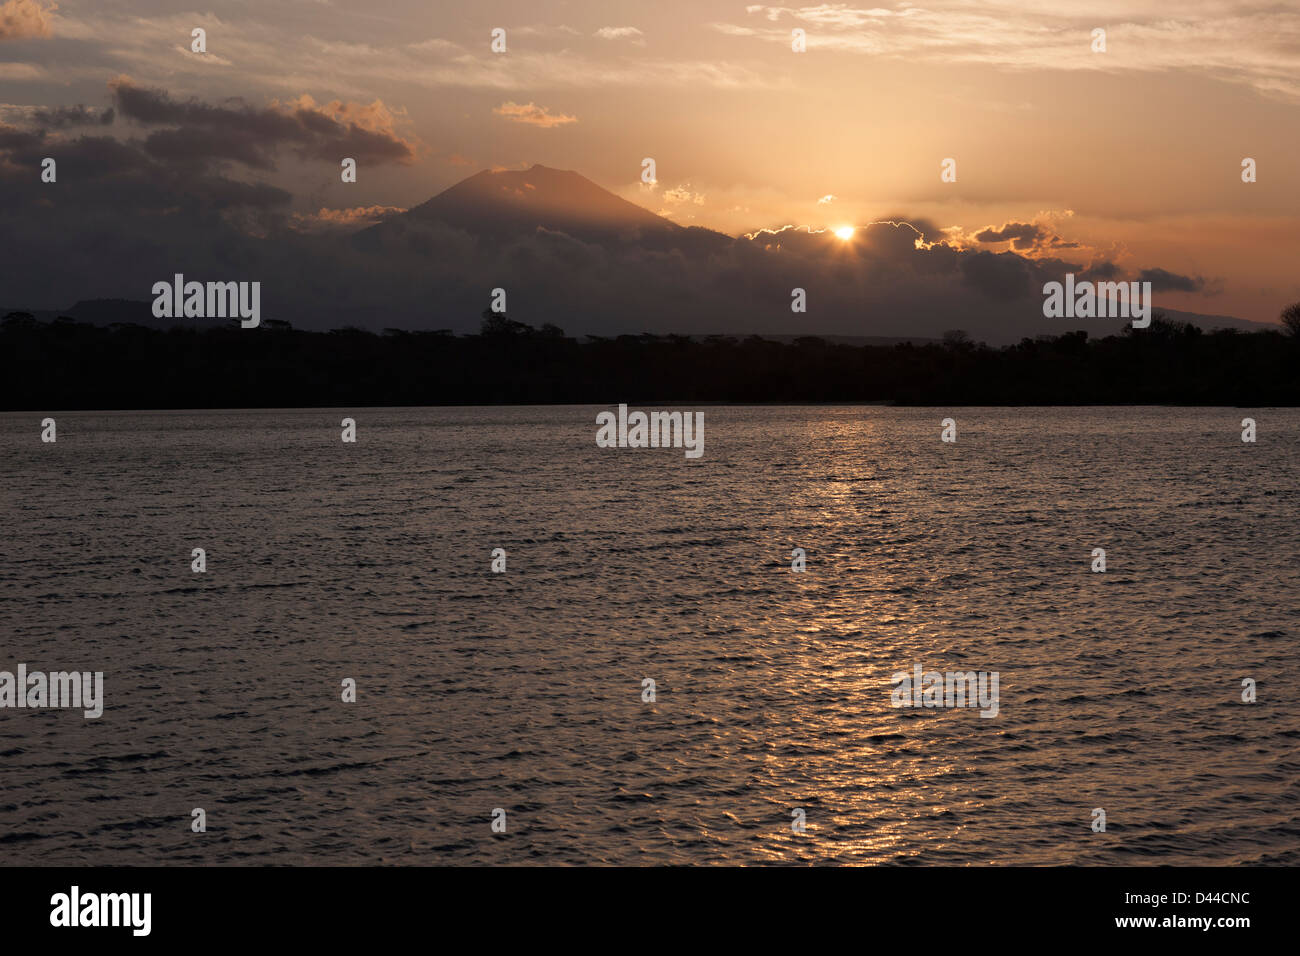 View of the Raung Volcano on Eastern Java at sunset from Western Bali. Stock Photo